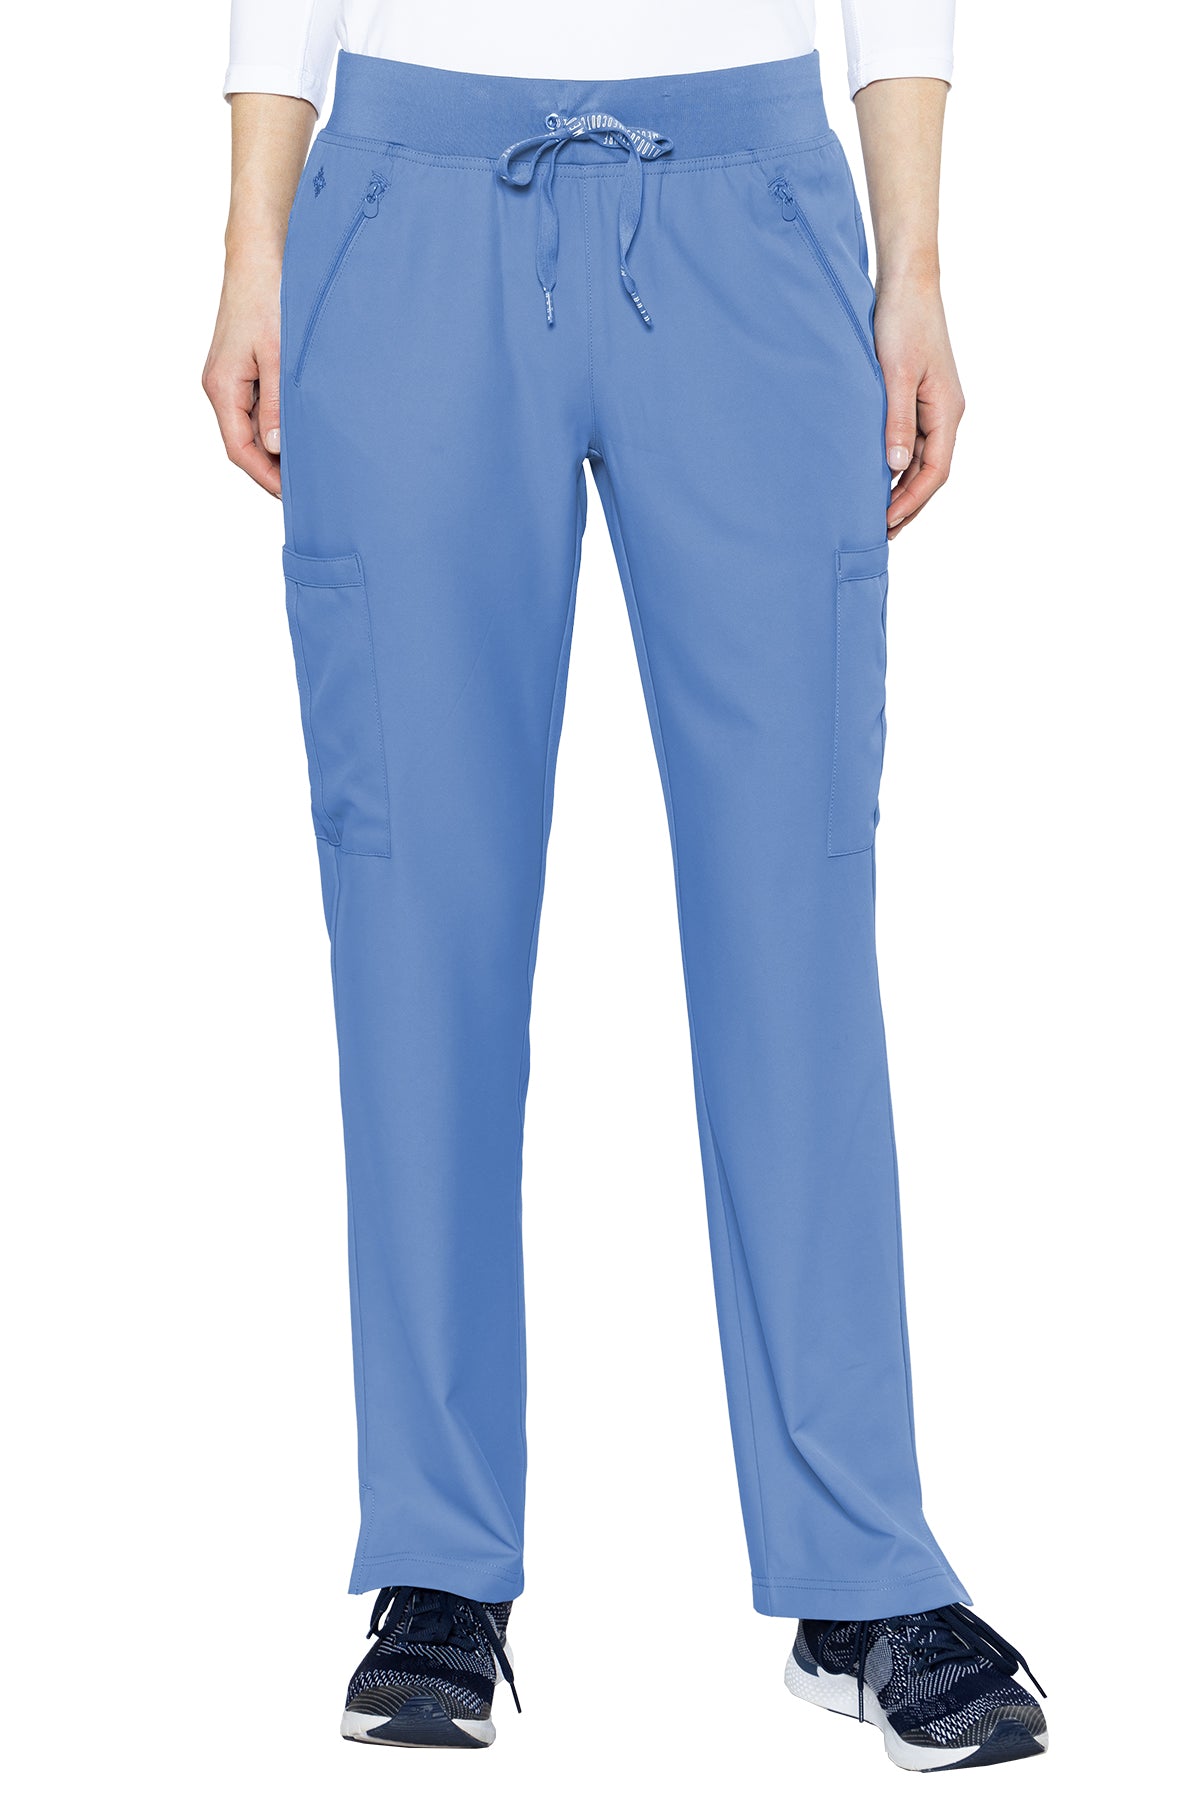 Med Couture Tall Scrub Pants Insight Zipper Pant in Ceil at Parker's Clothing and Shoes.